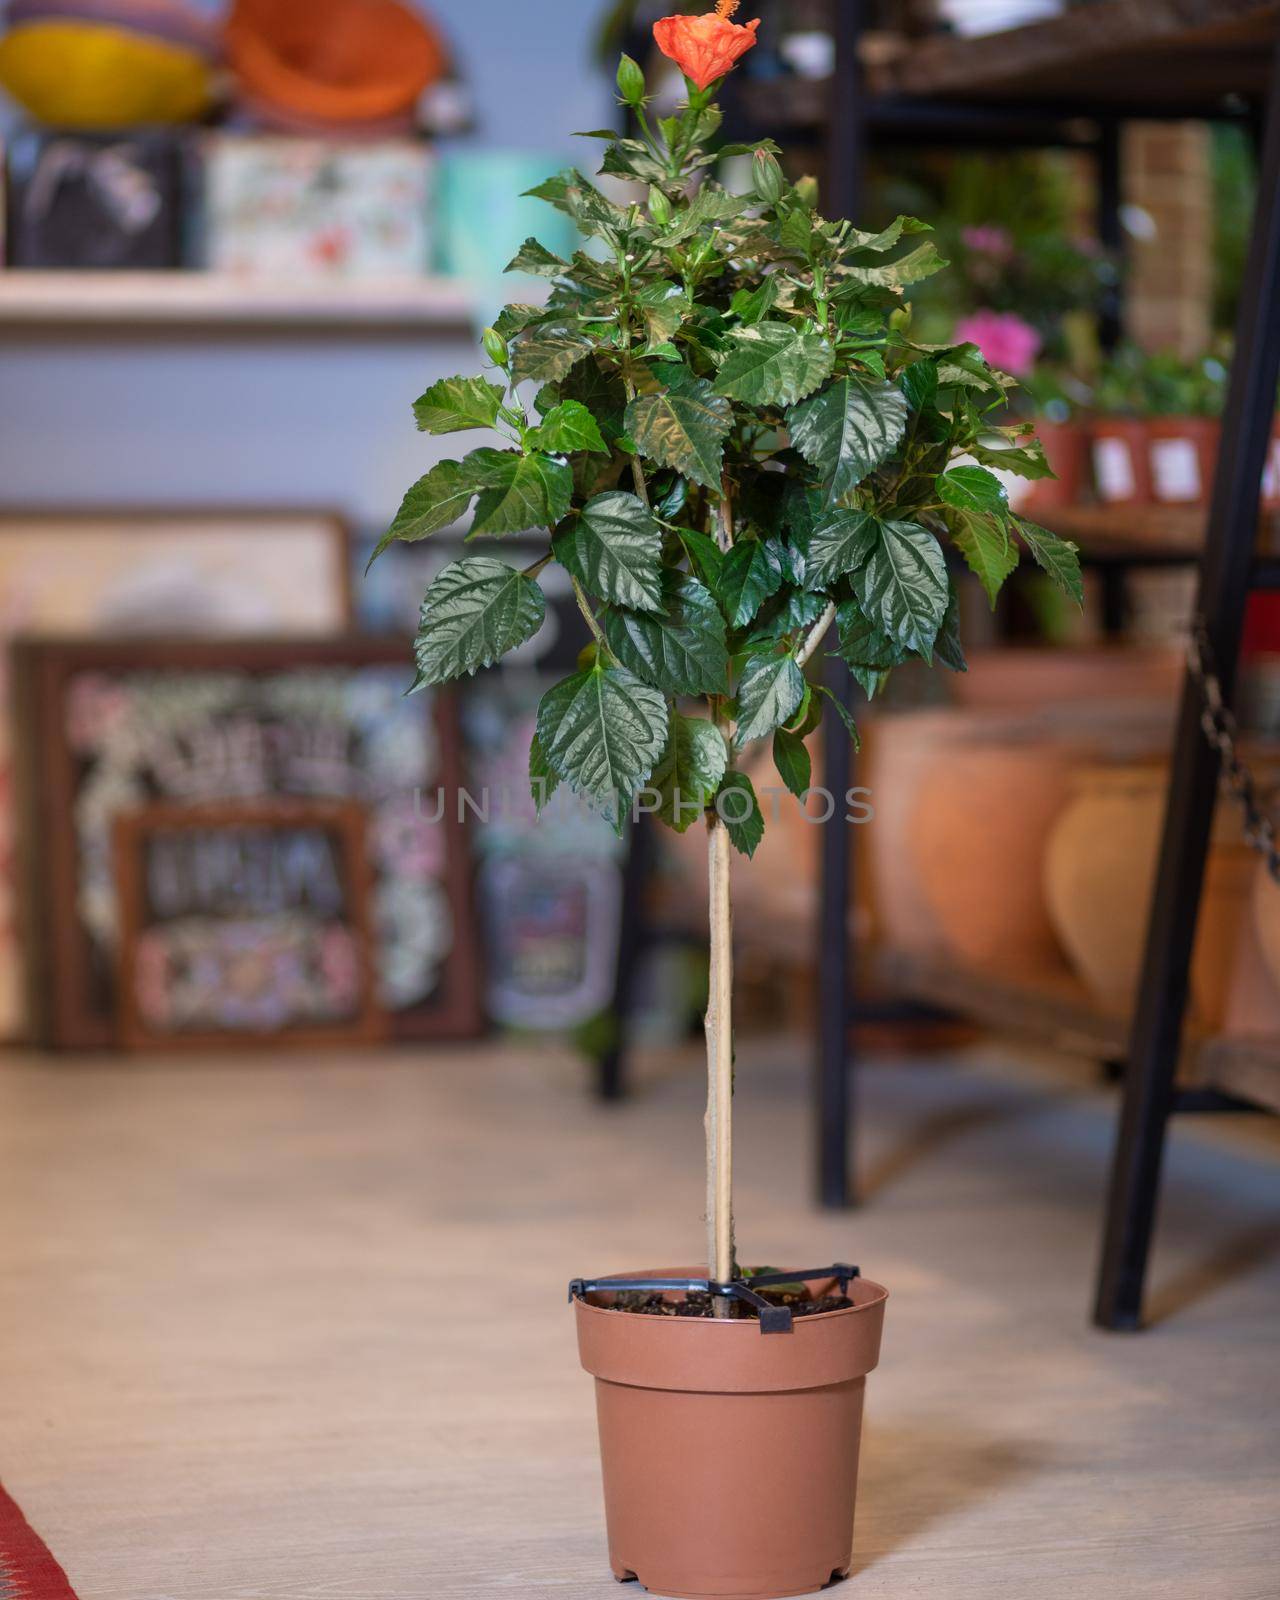 Ficus Moclame - Indian Laurel at the garden shop by ferhad